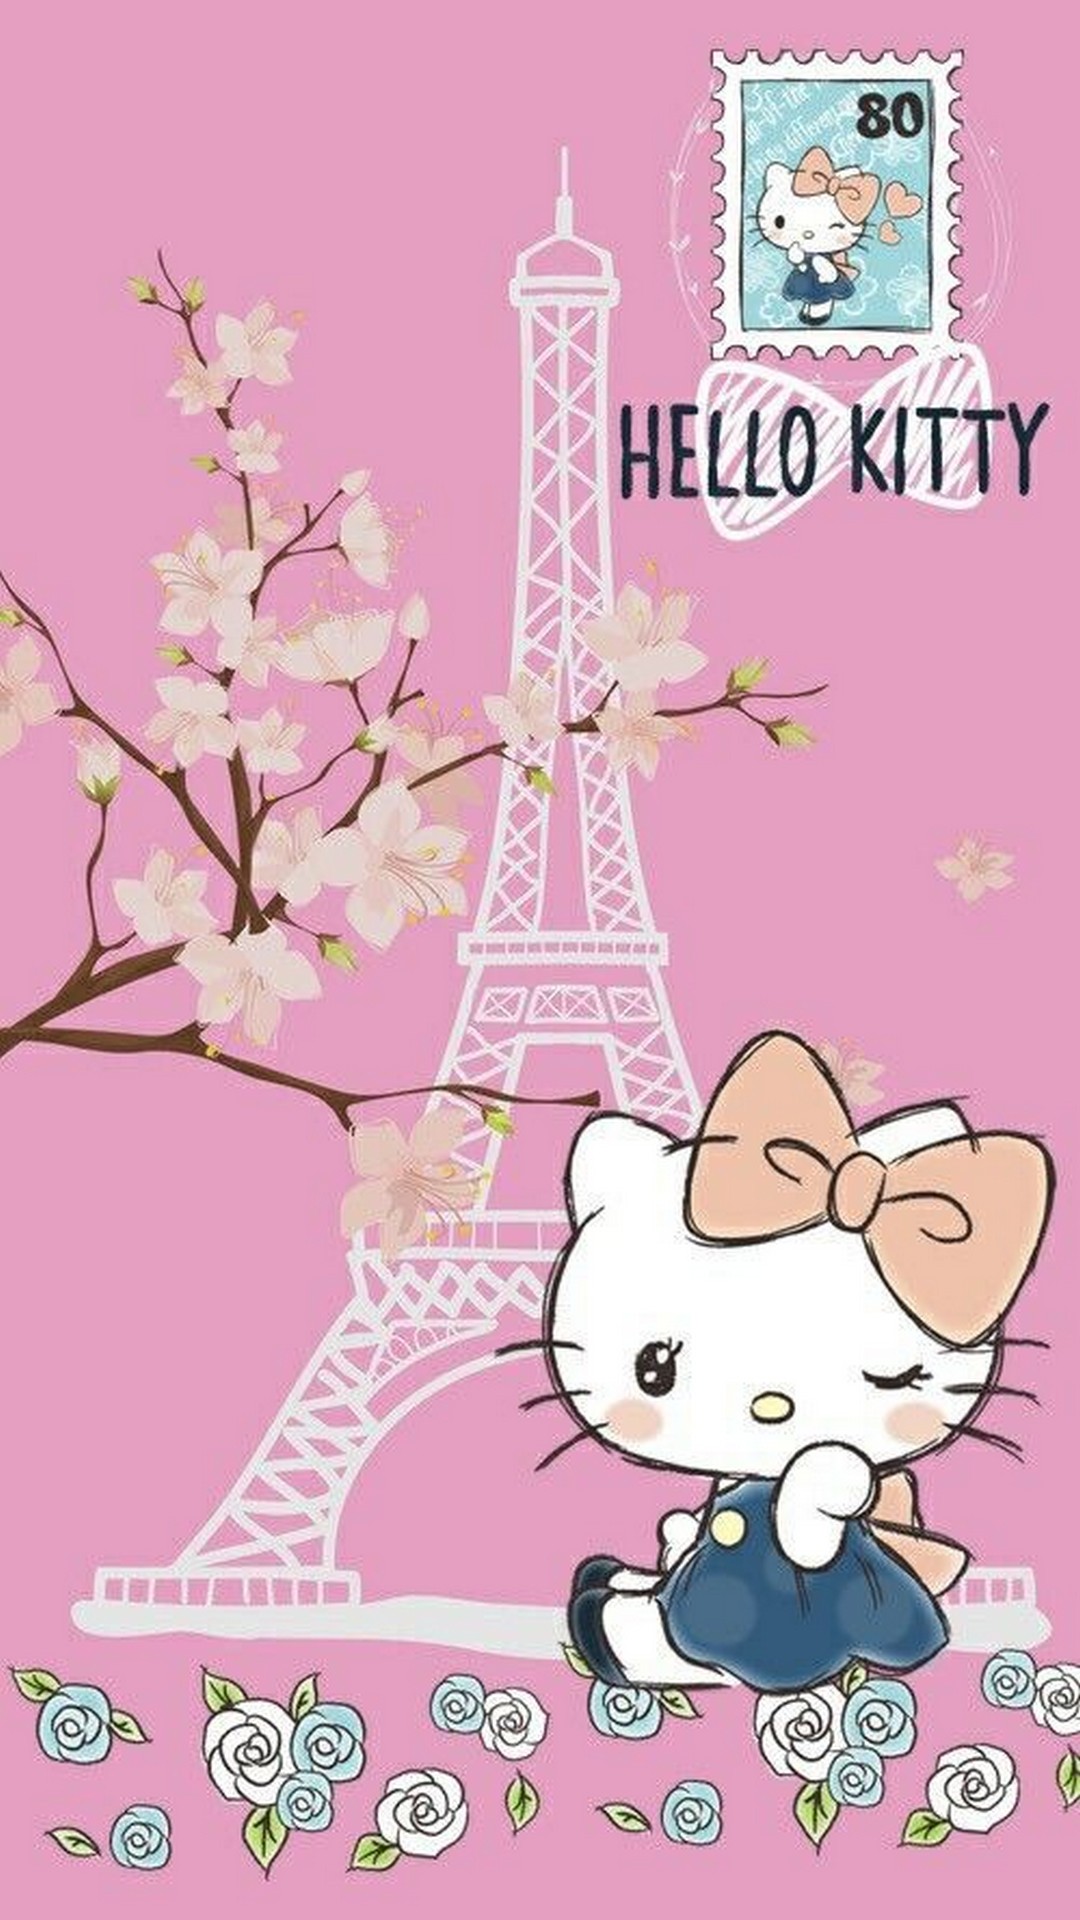 Android Wallpaper Hello Kitty Images with image resolution 1080x1920 pixel. You can make this wallpaper for your Android backgrounds, Tablet, Smartphones Screensavers and Mobile Phone Lock Screen